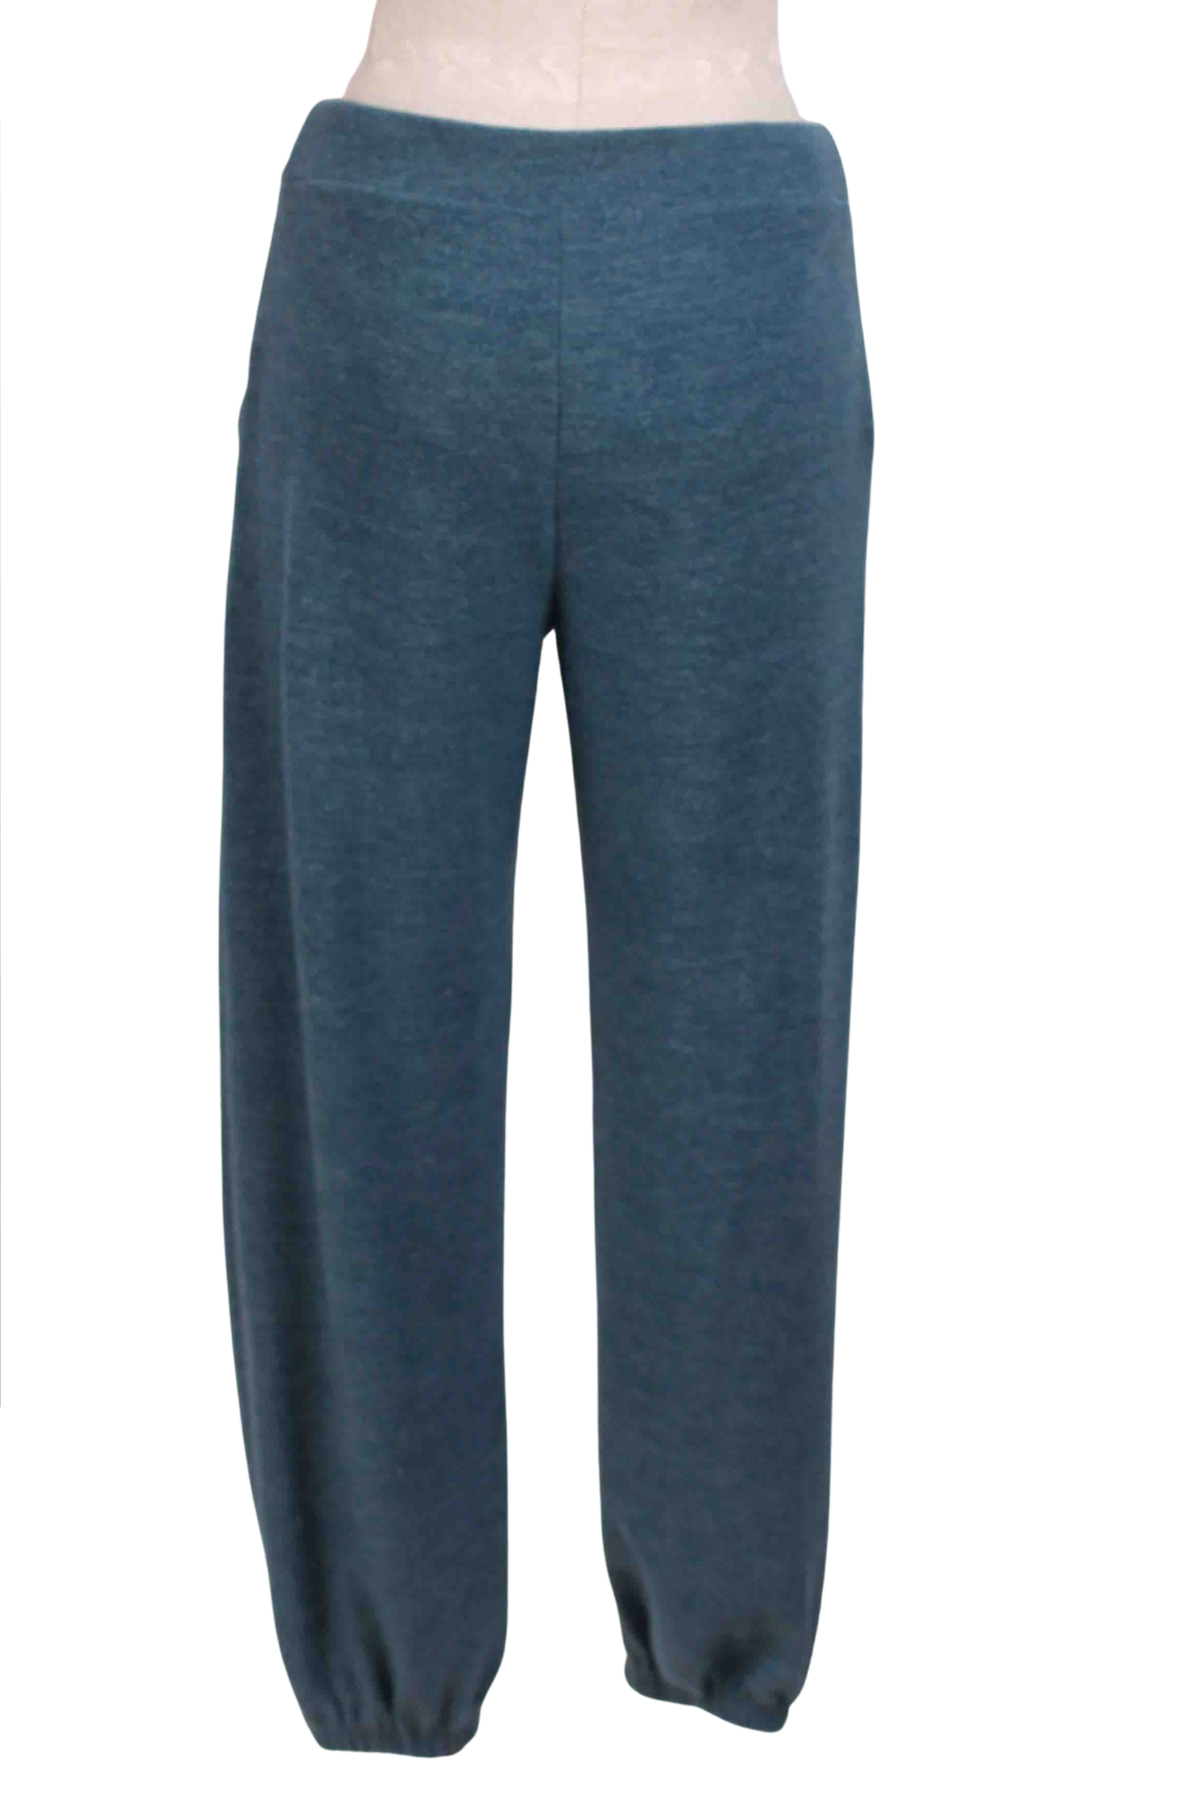 back view of Blue Brushed Long Straight Jogger by Inoah